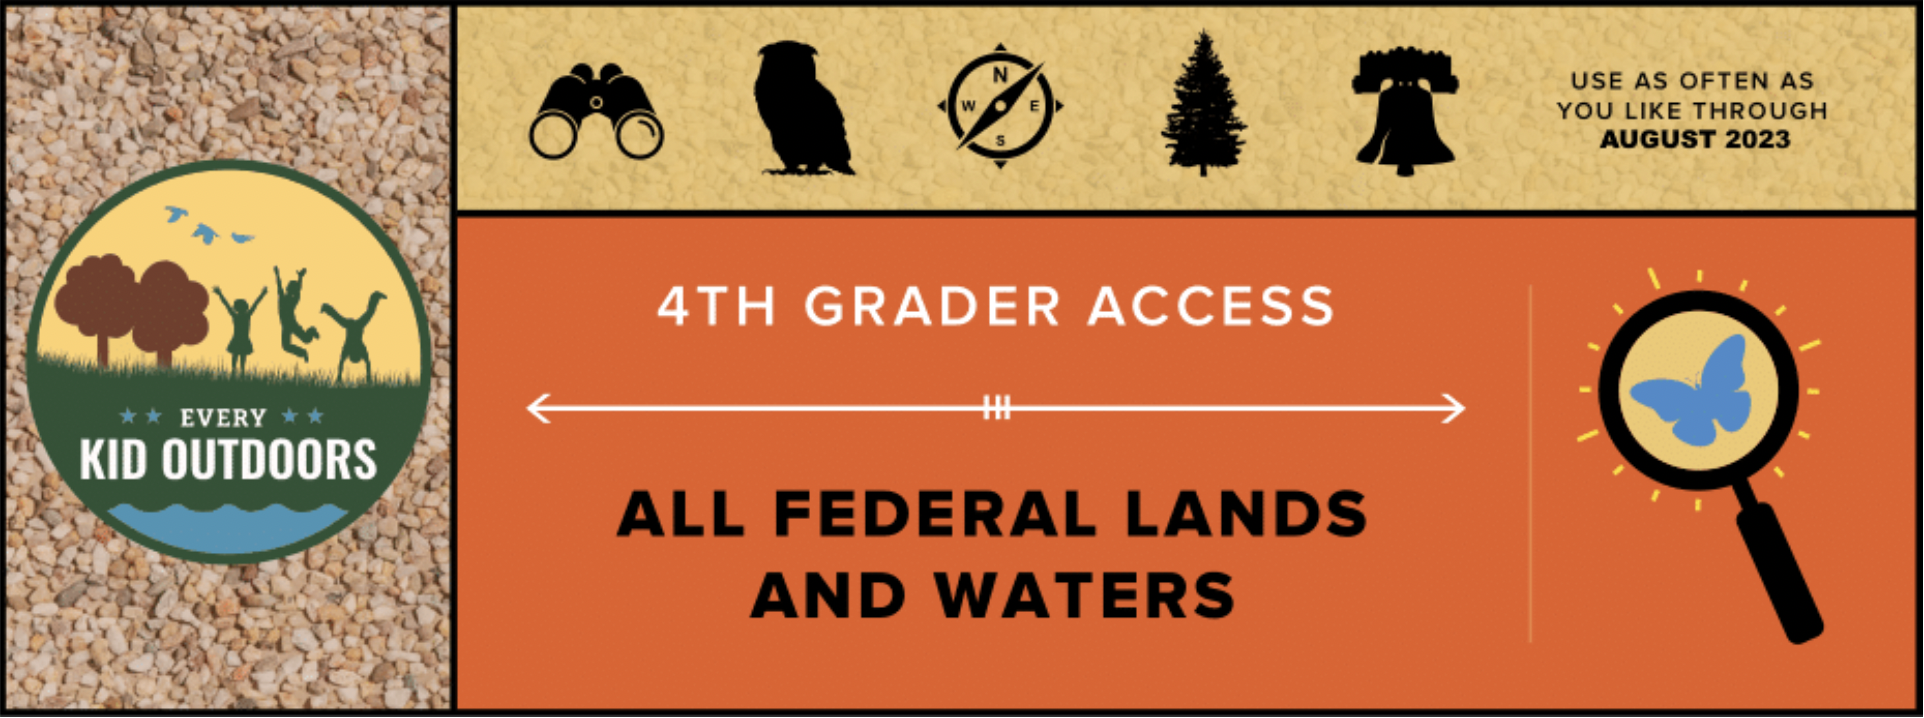 every kid outdoors - 4th grade national park access